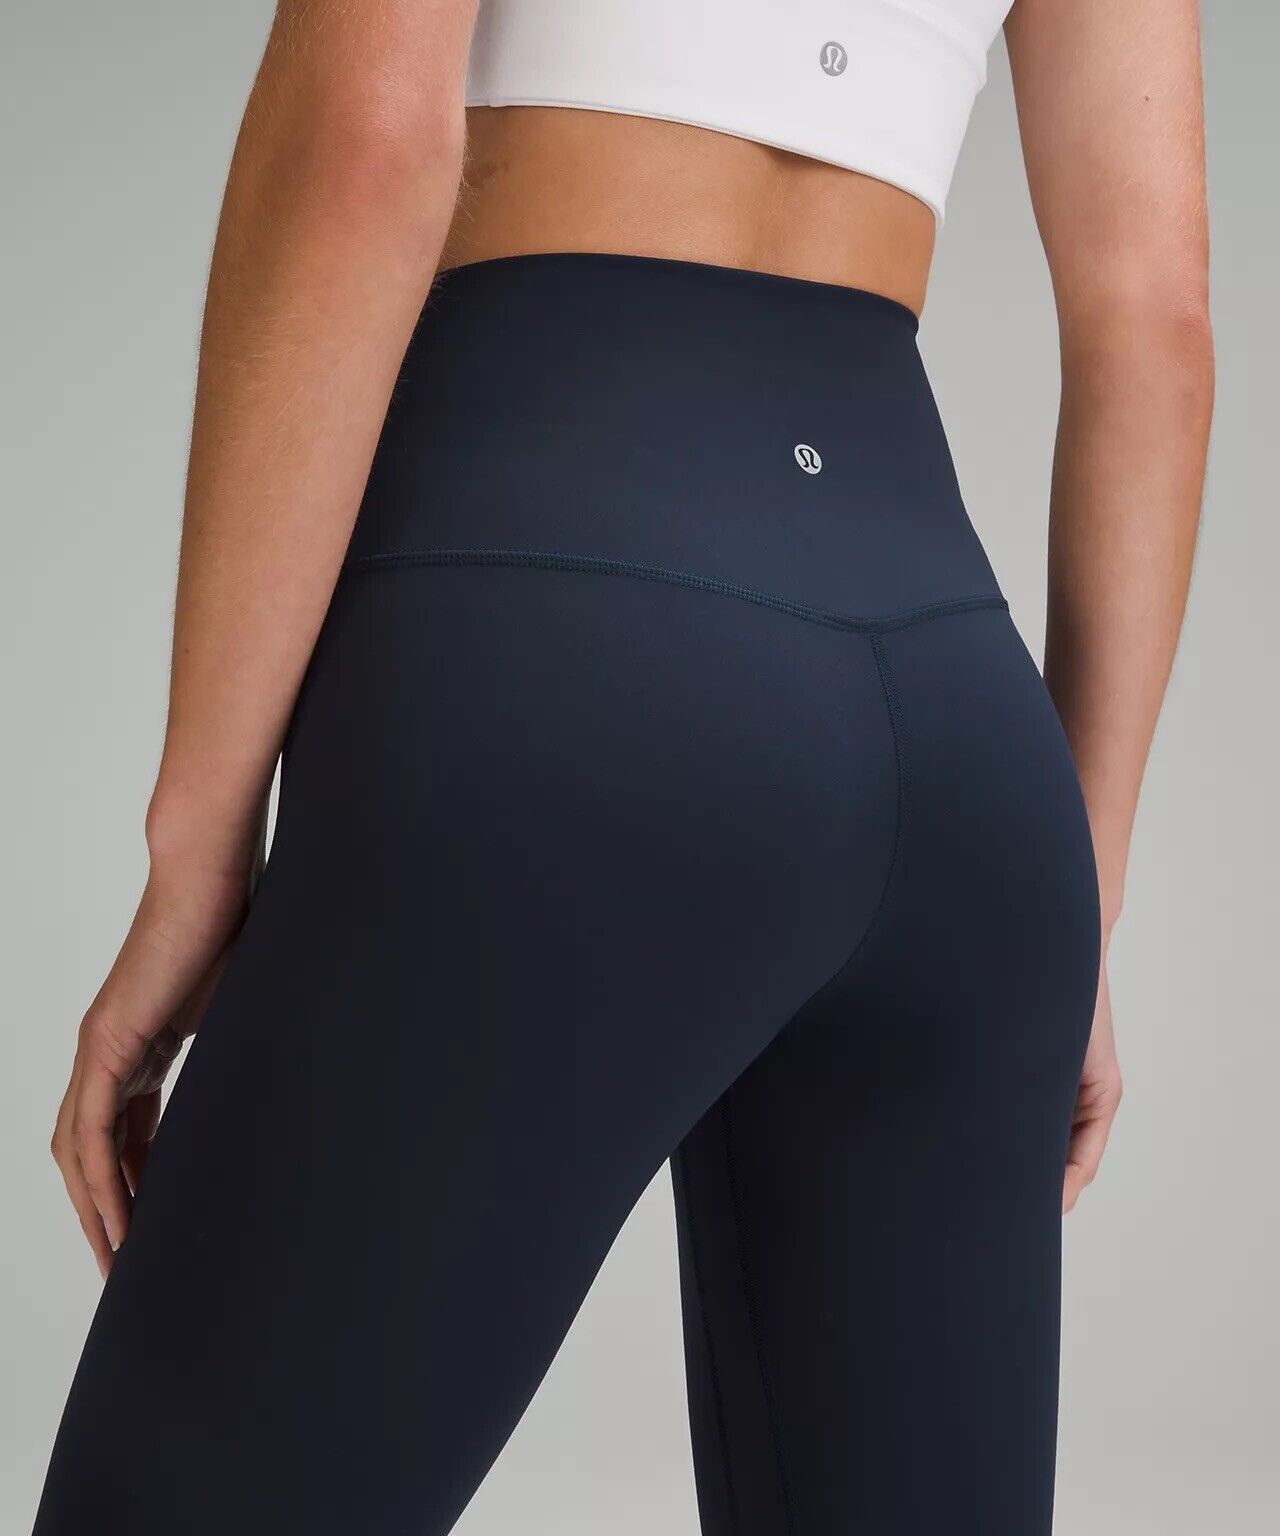 sell] NWT Lululemon Align High-Rise Crop 21” in Java (2) : r